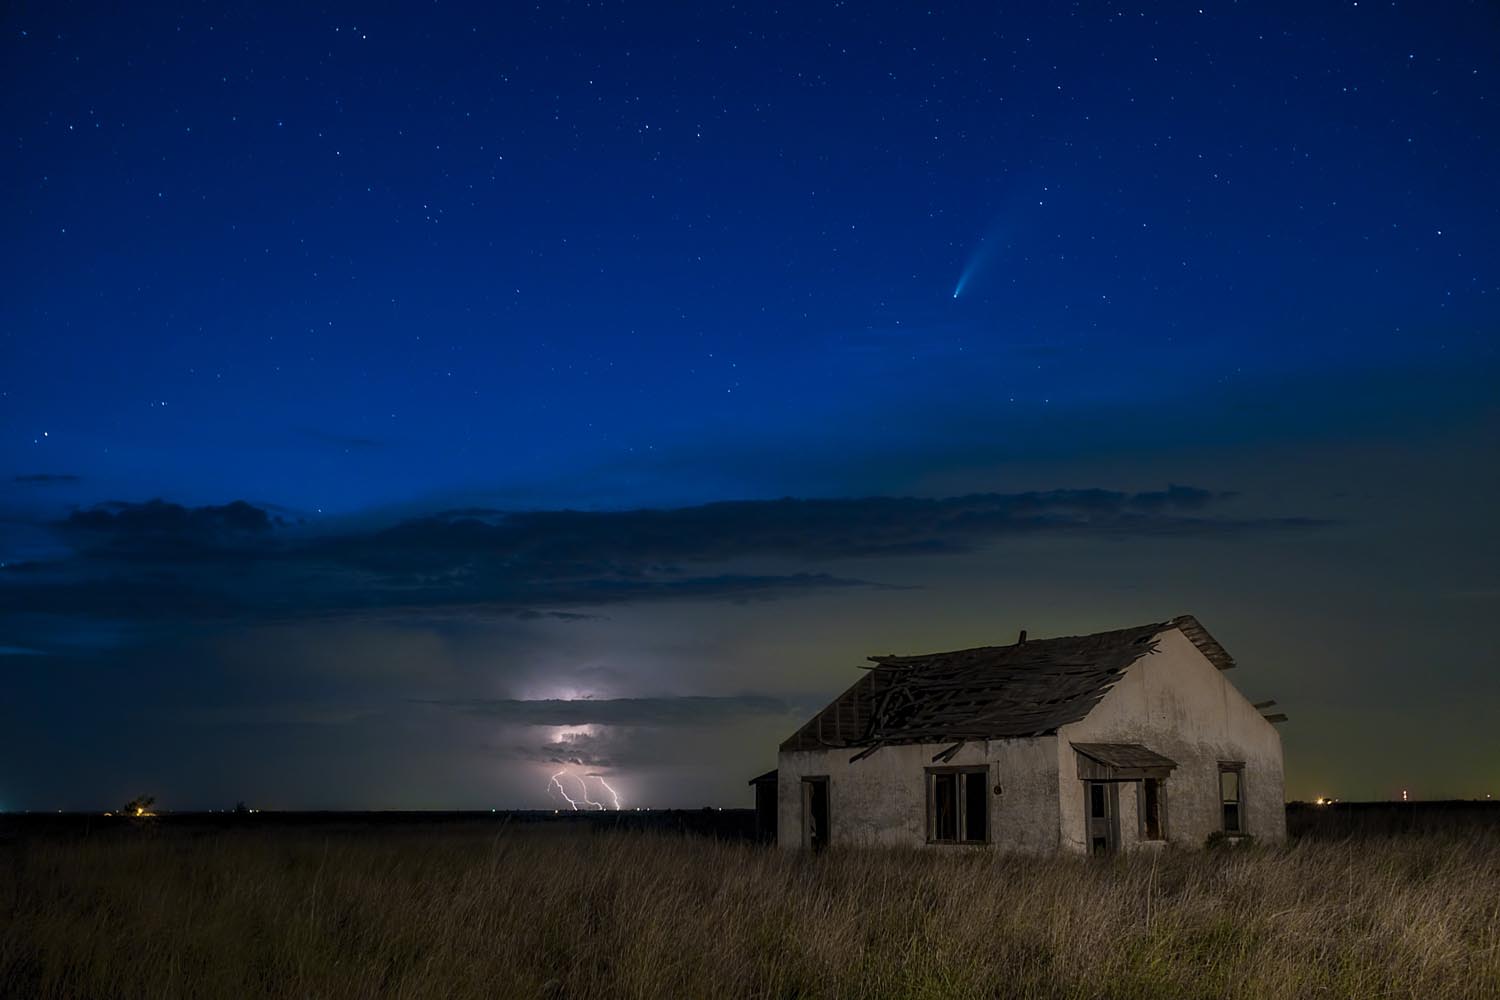 James Clinich: Neowise and the Approaching Storm - Sudan, Texas